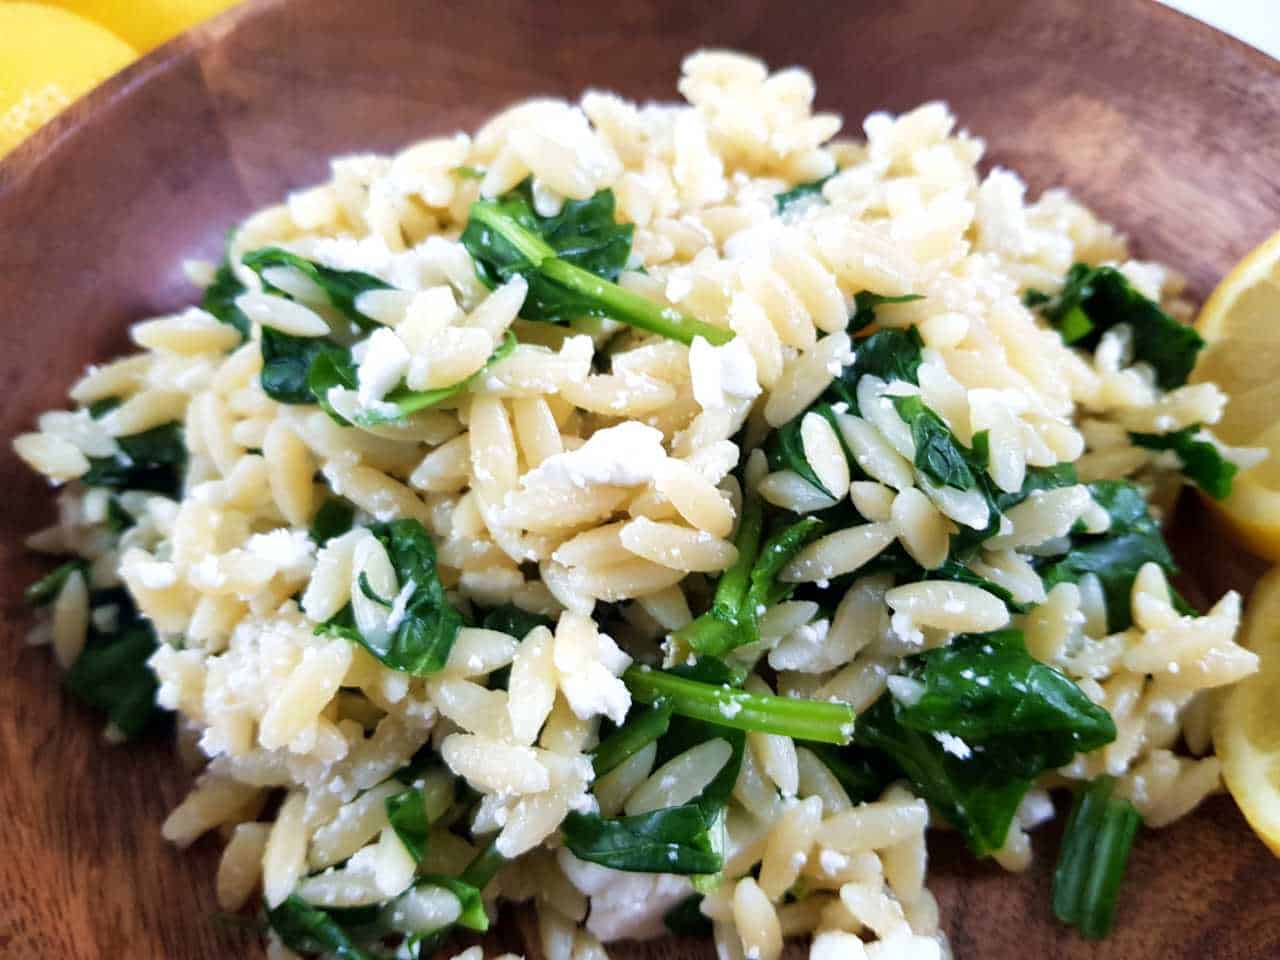 Orzo salad with spinach in a wooden bowl.